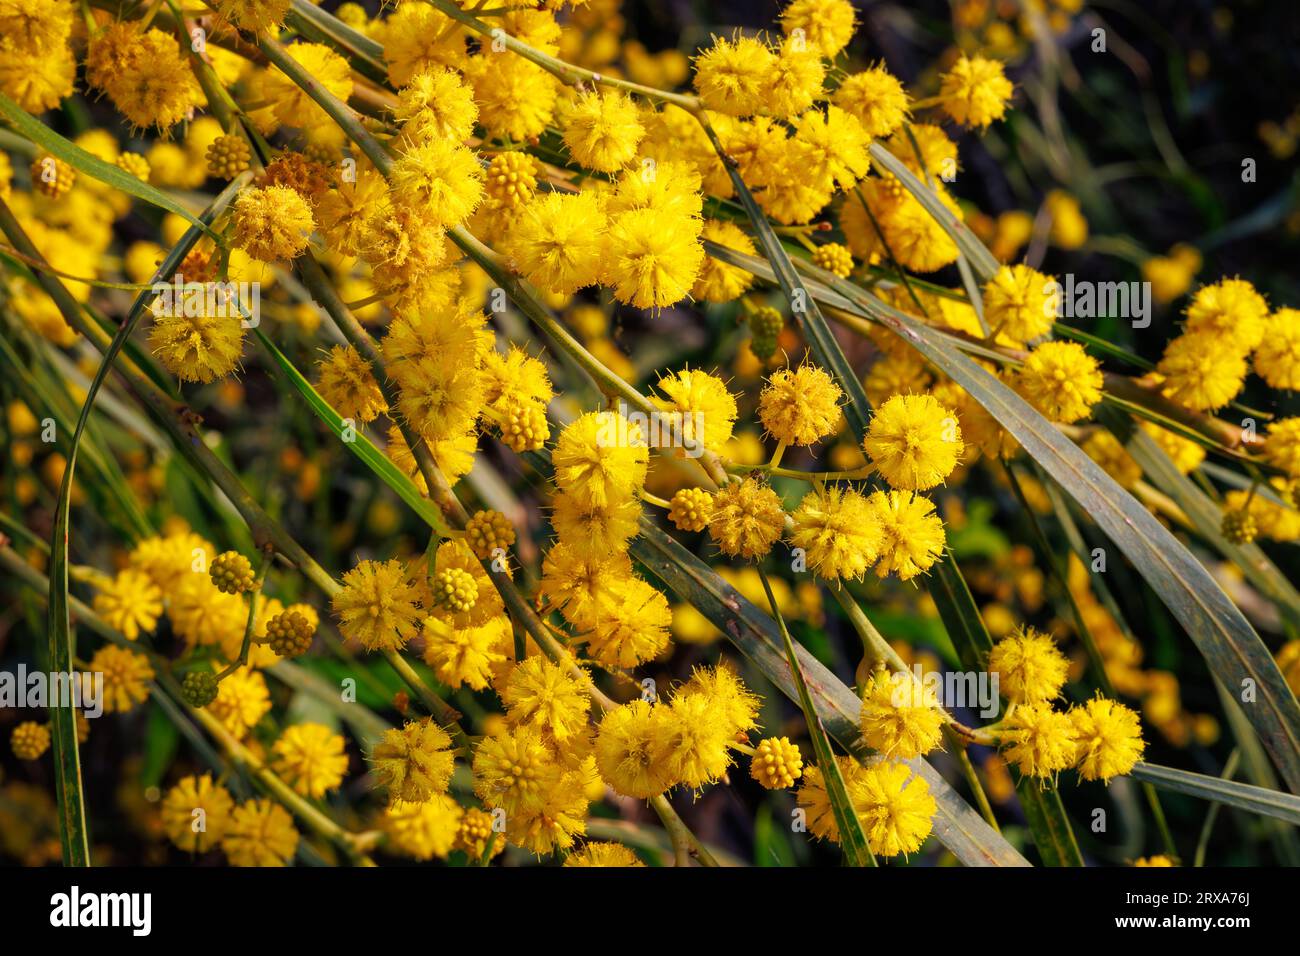 Branches and flowers of Acacia saligna on the island of Sicily, Italy Stock Photo